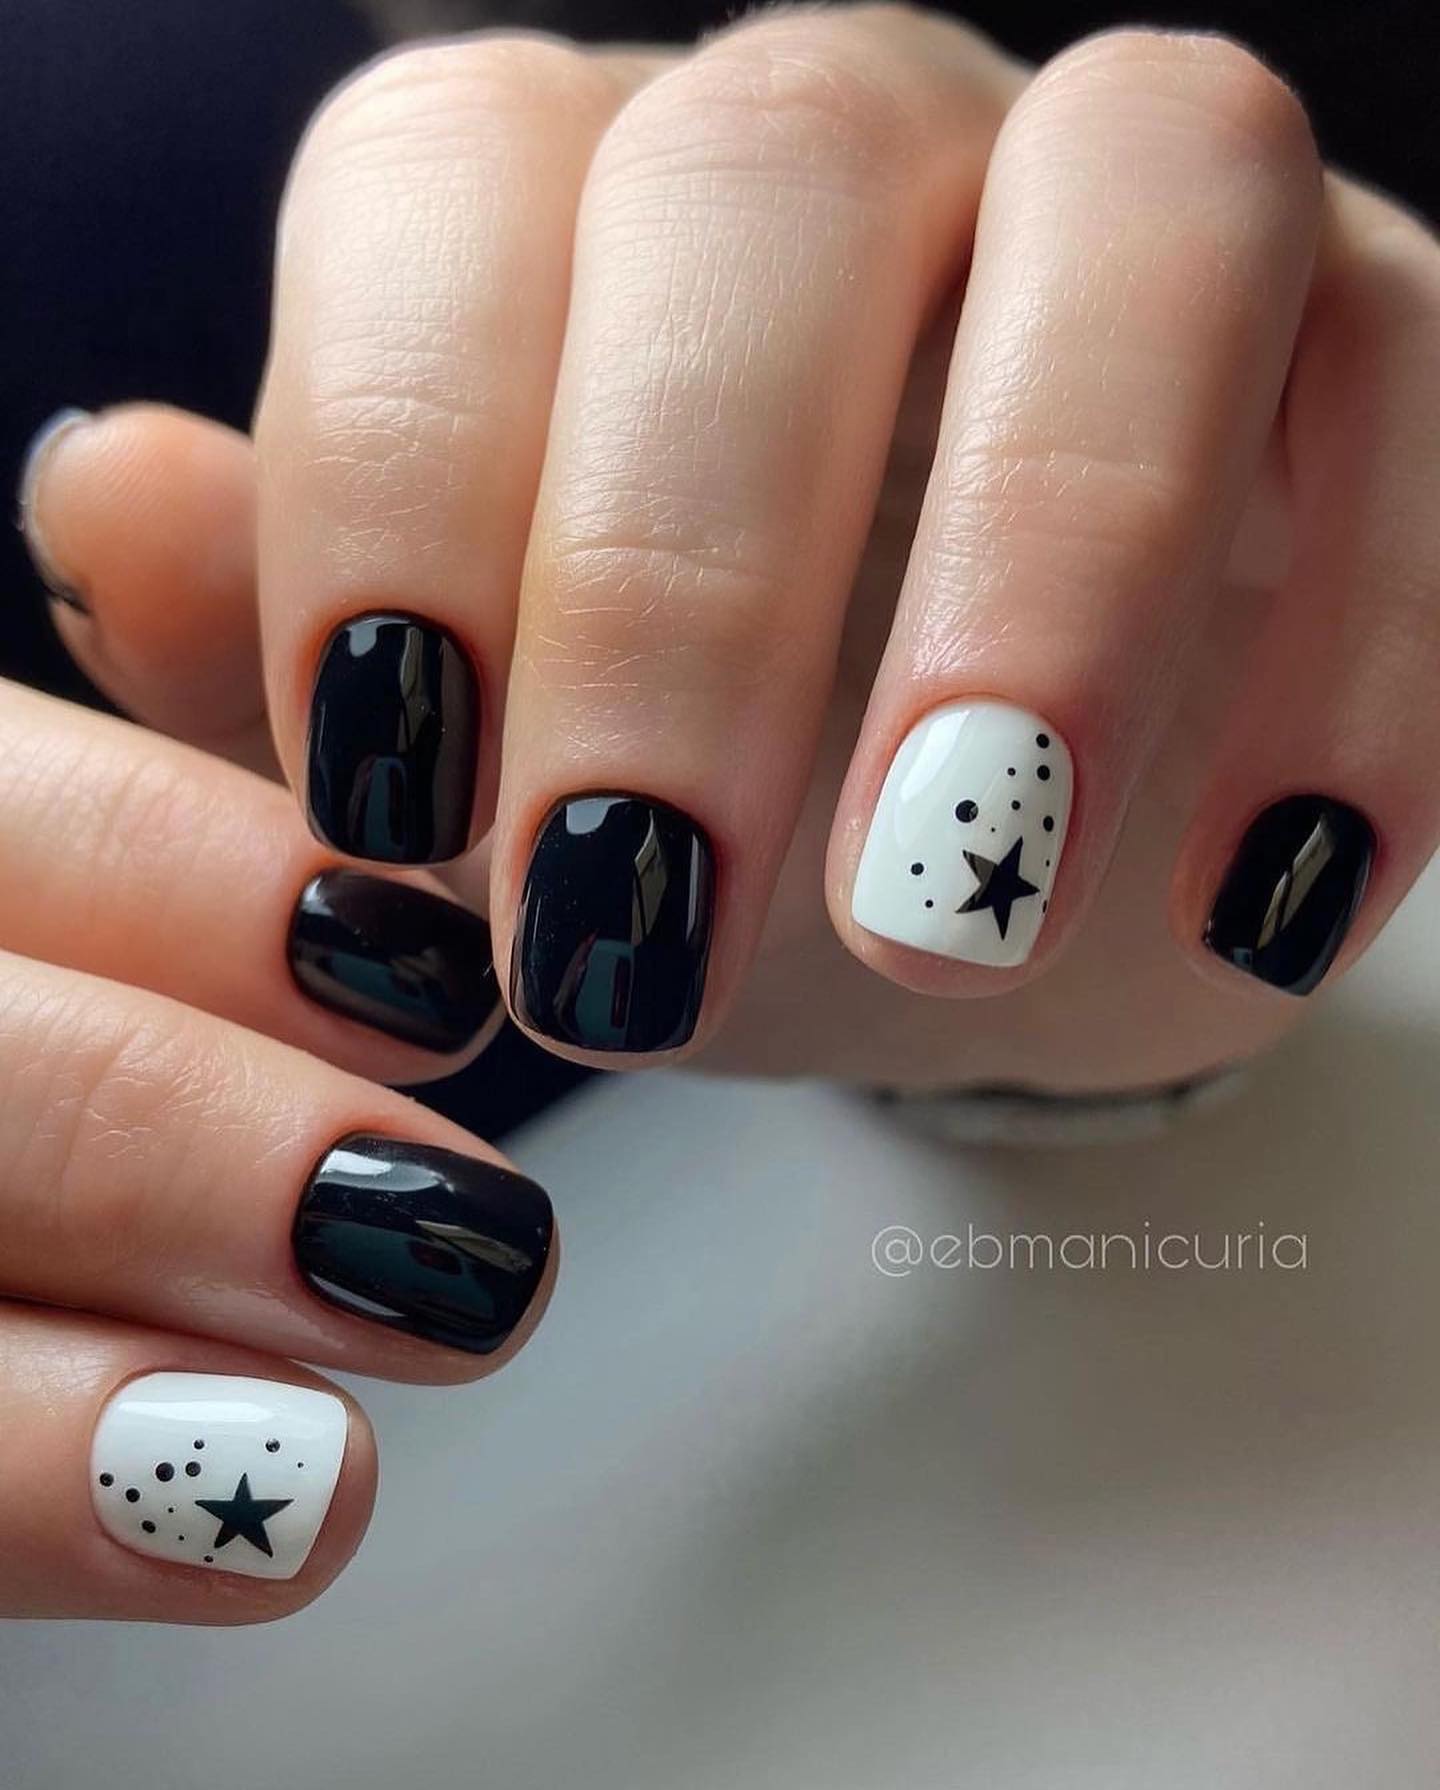 100+ Short Nail Designs You’ll Want To Try This Year images 12